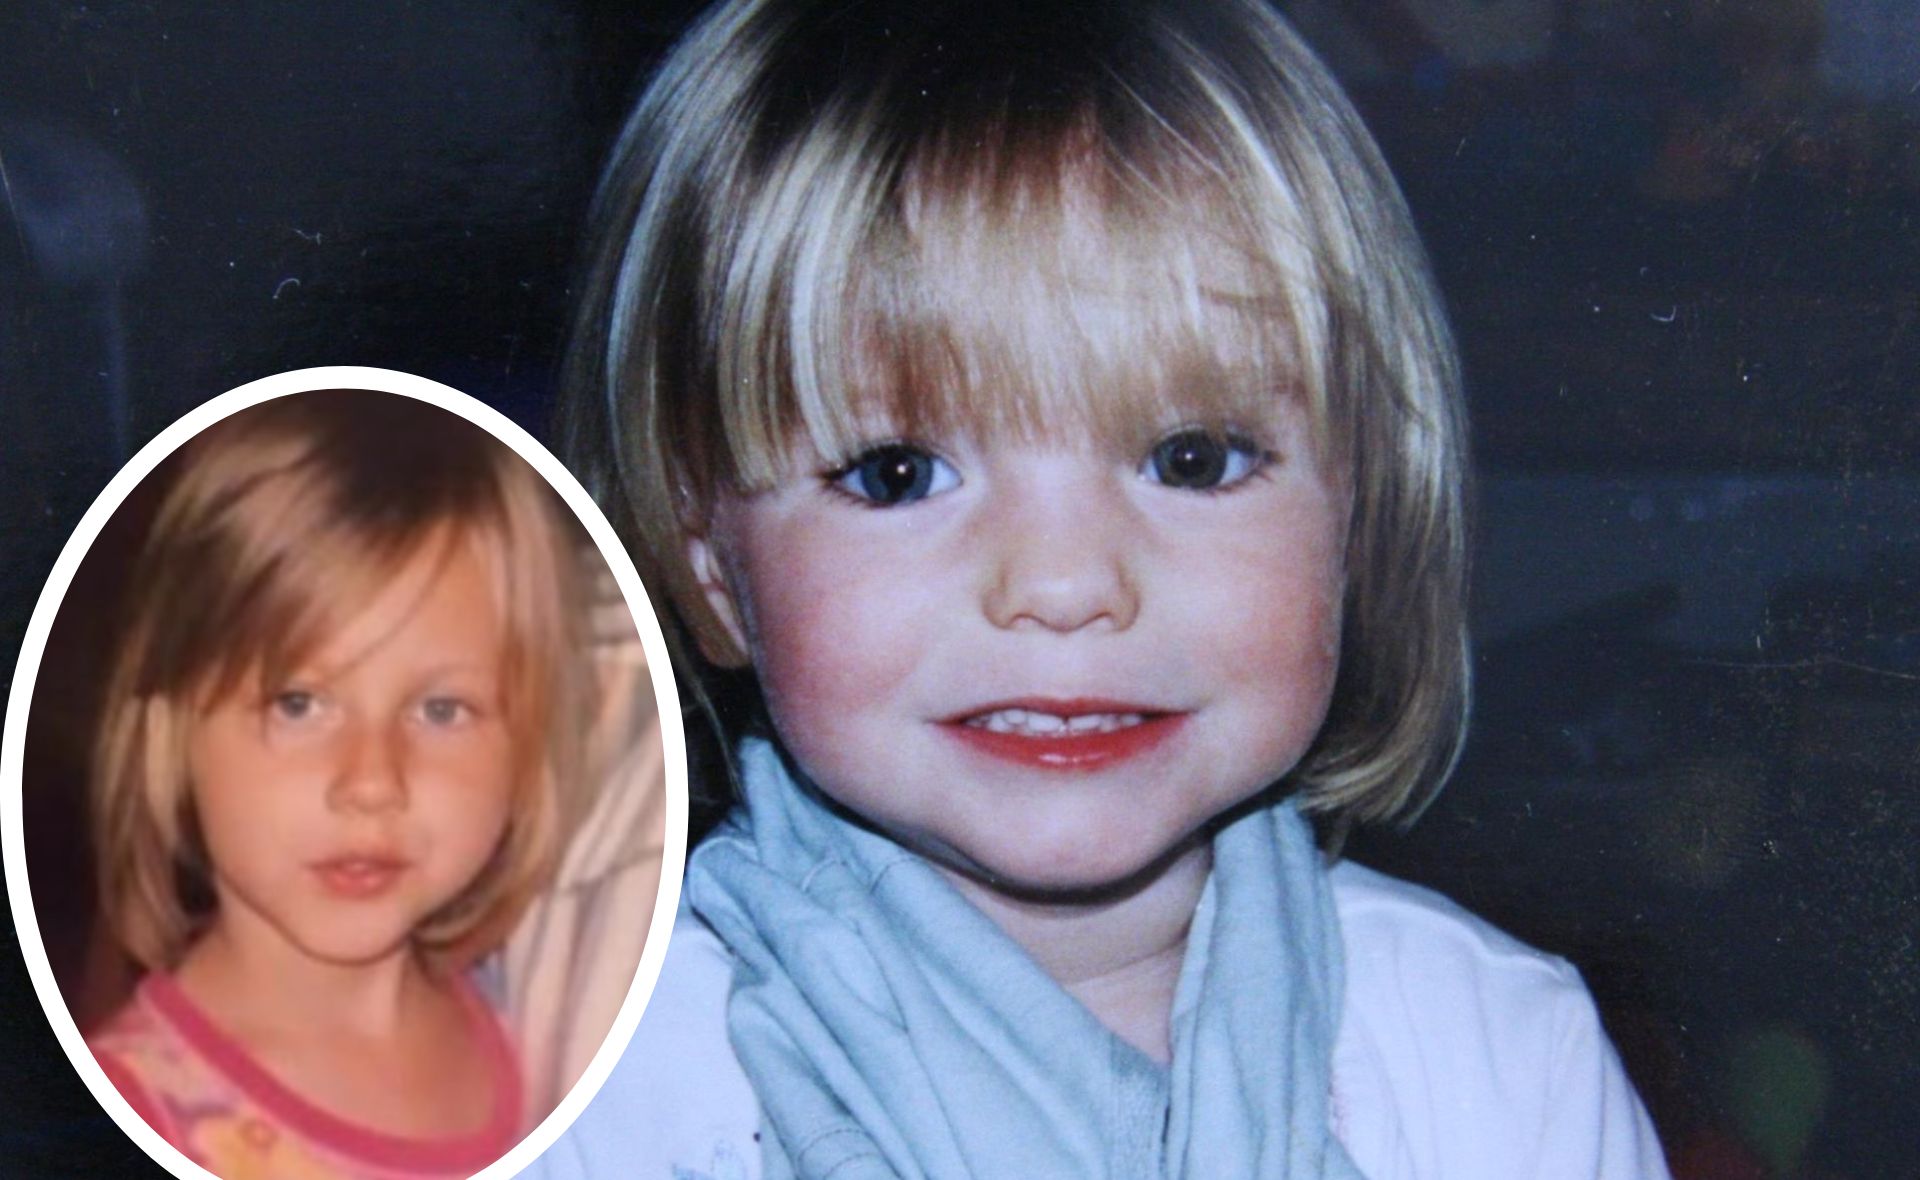 Madeleine McCann look-a-like Julia Faustyna’s phone has been seized by California police